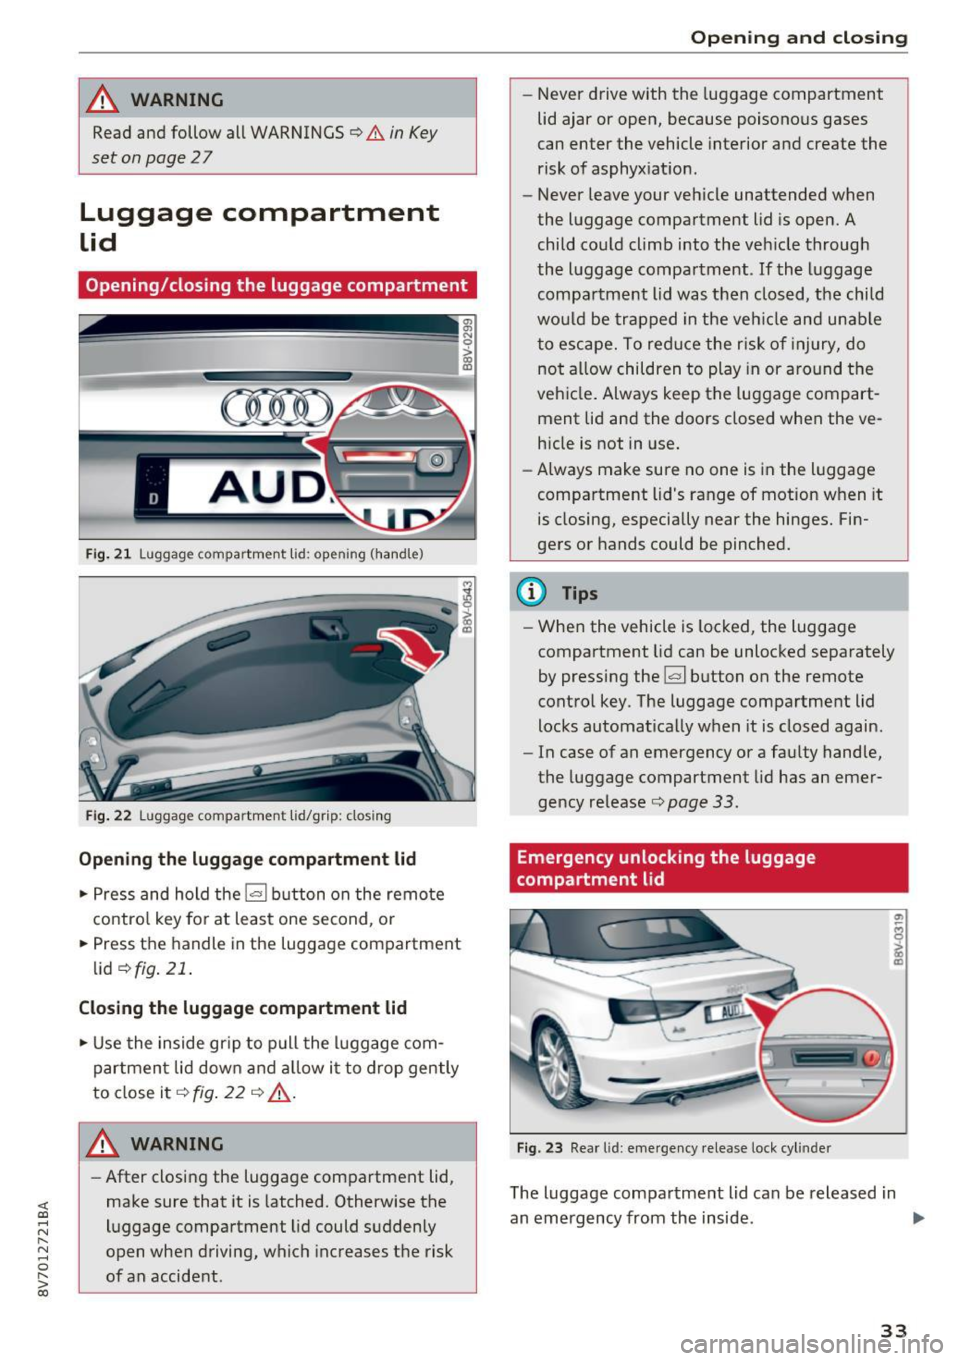 AUDI A3 CABRIOLET 2016 Owners Guide <( co ..... N 
" N ..... 0 
" > 00 
A WARNING 
Read  and  follow  all WARNINGS¢&. in Key 
set  on page 2 7 
Luggage  compartment 
Lid 
Opening/closing  the  luggage  compartment 
Fig . 21 Luggag e  c